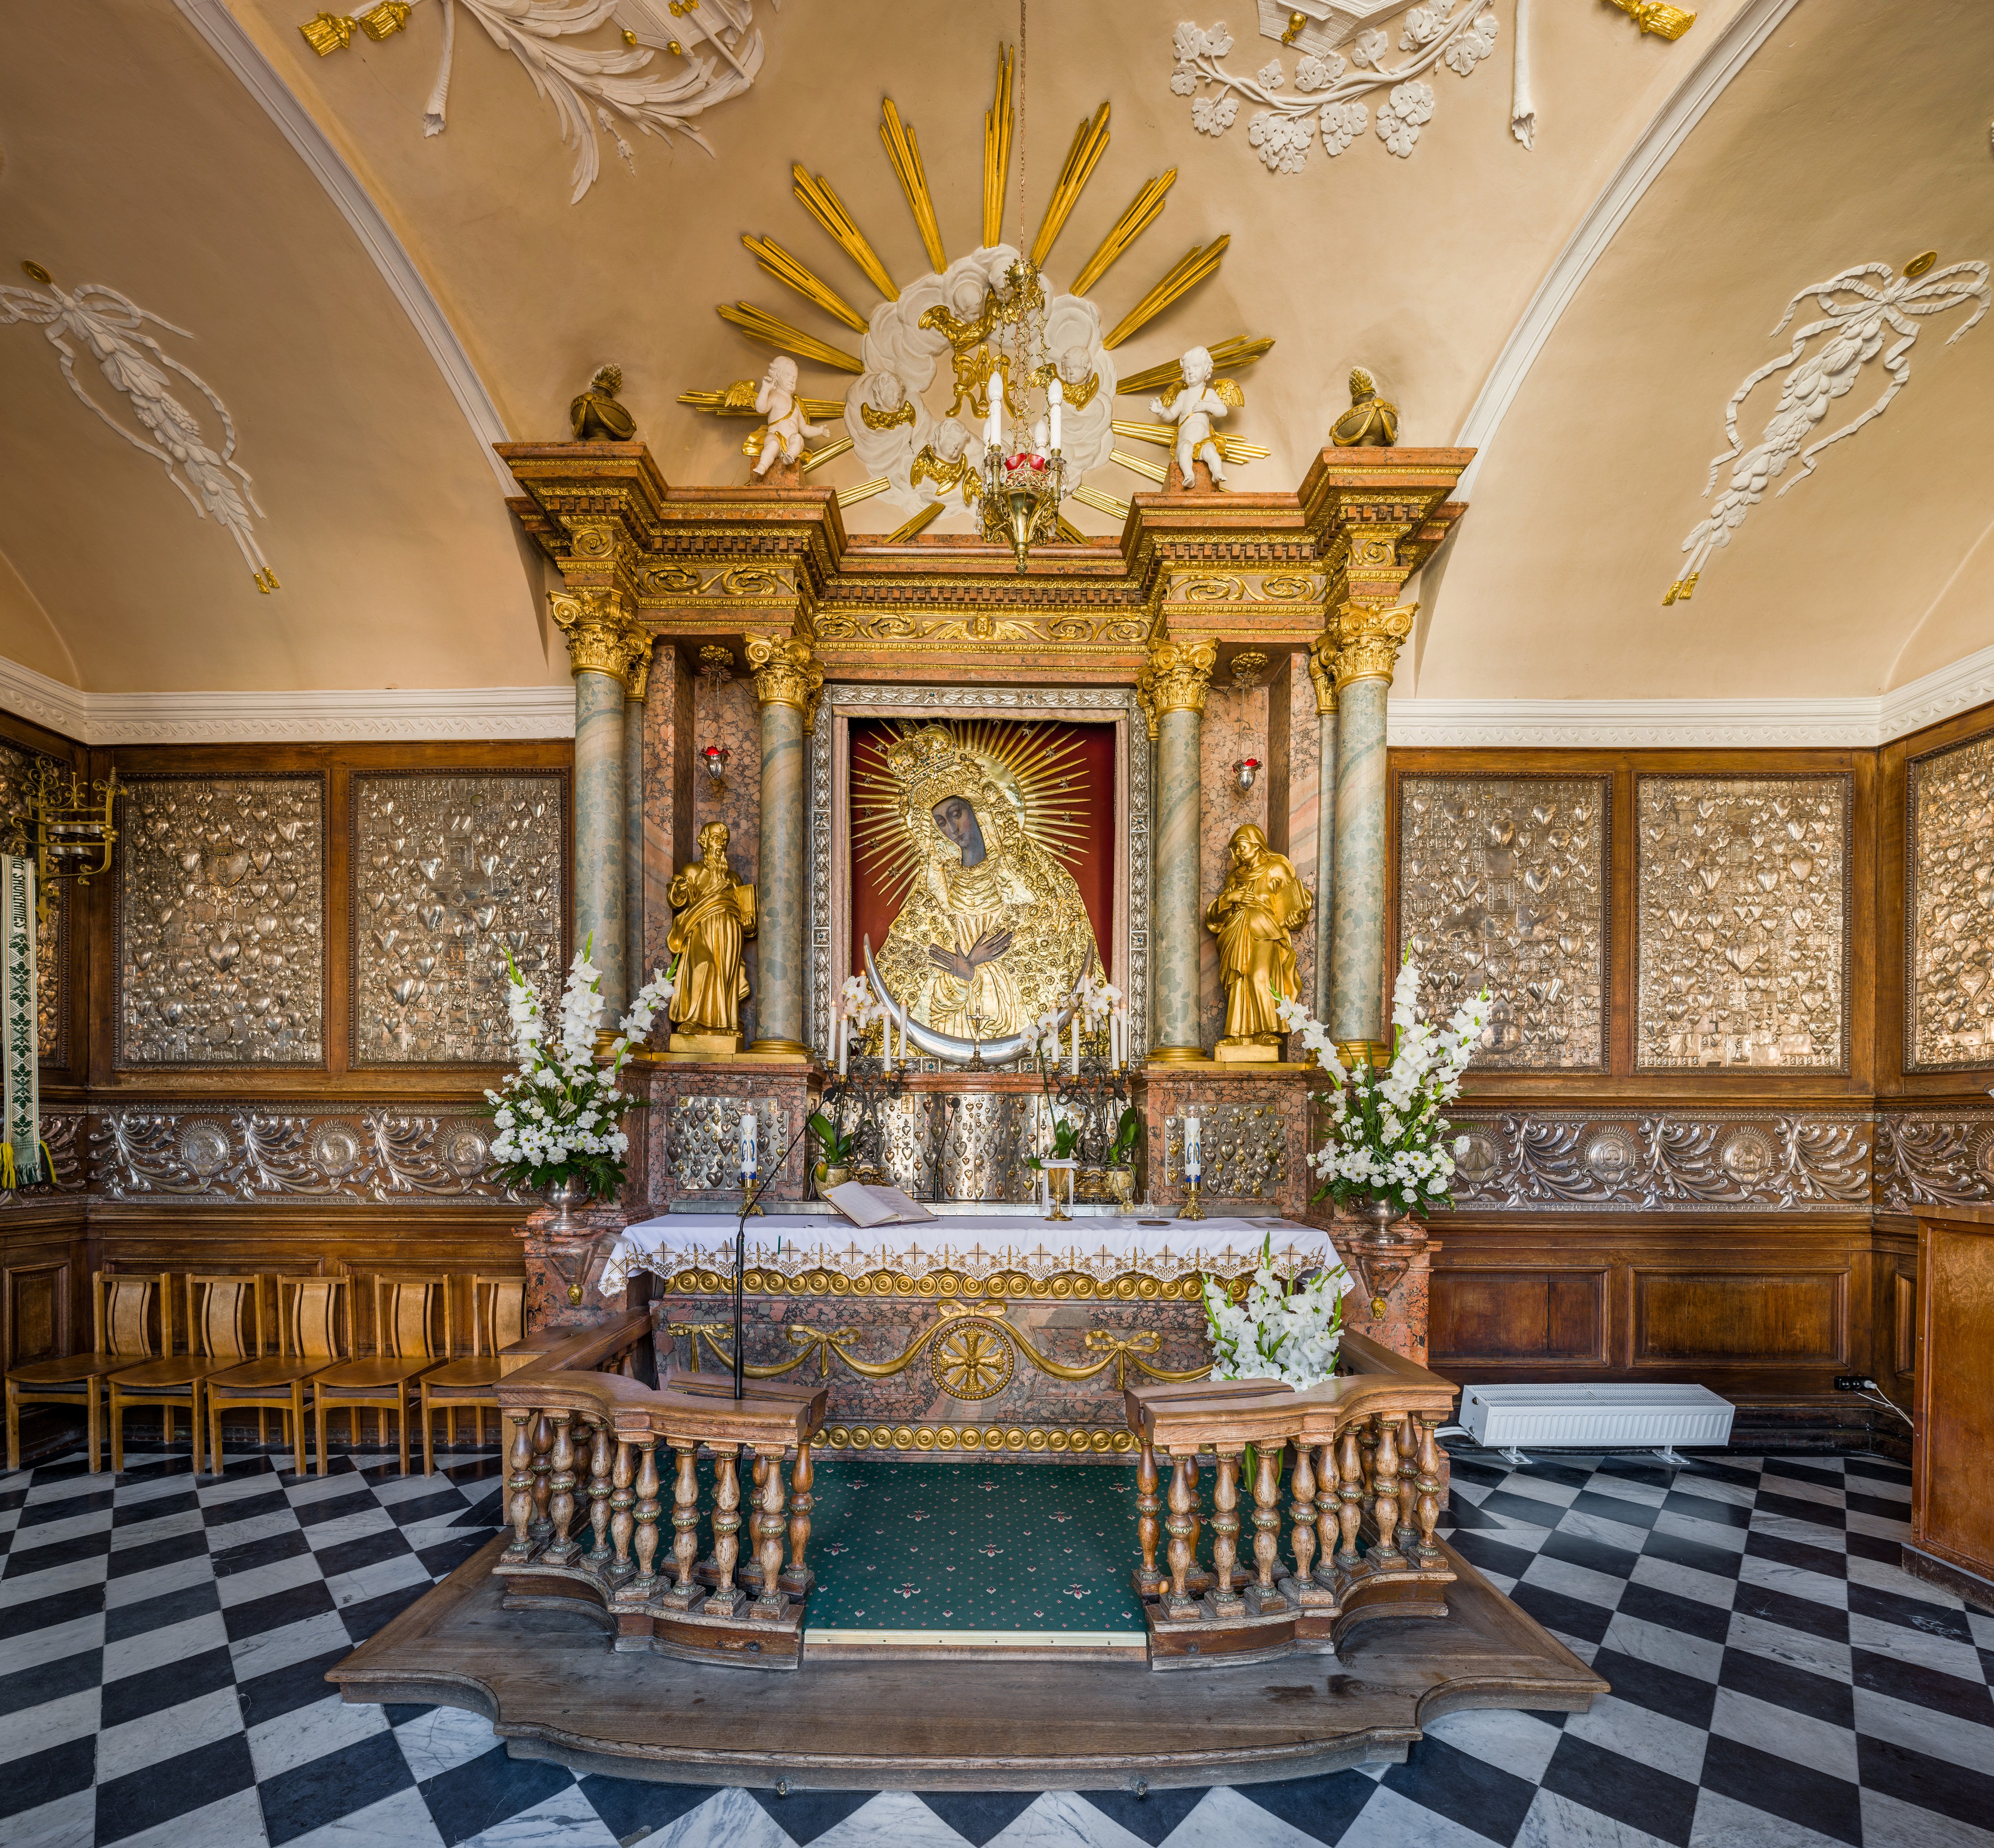 Our Lady of the Gate of Dawn Interior, Vilnius, Lithuania - Diliff